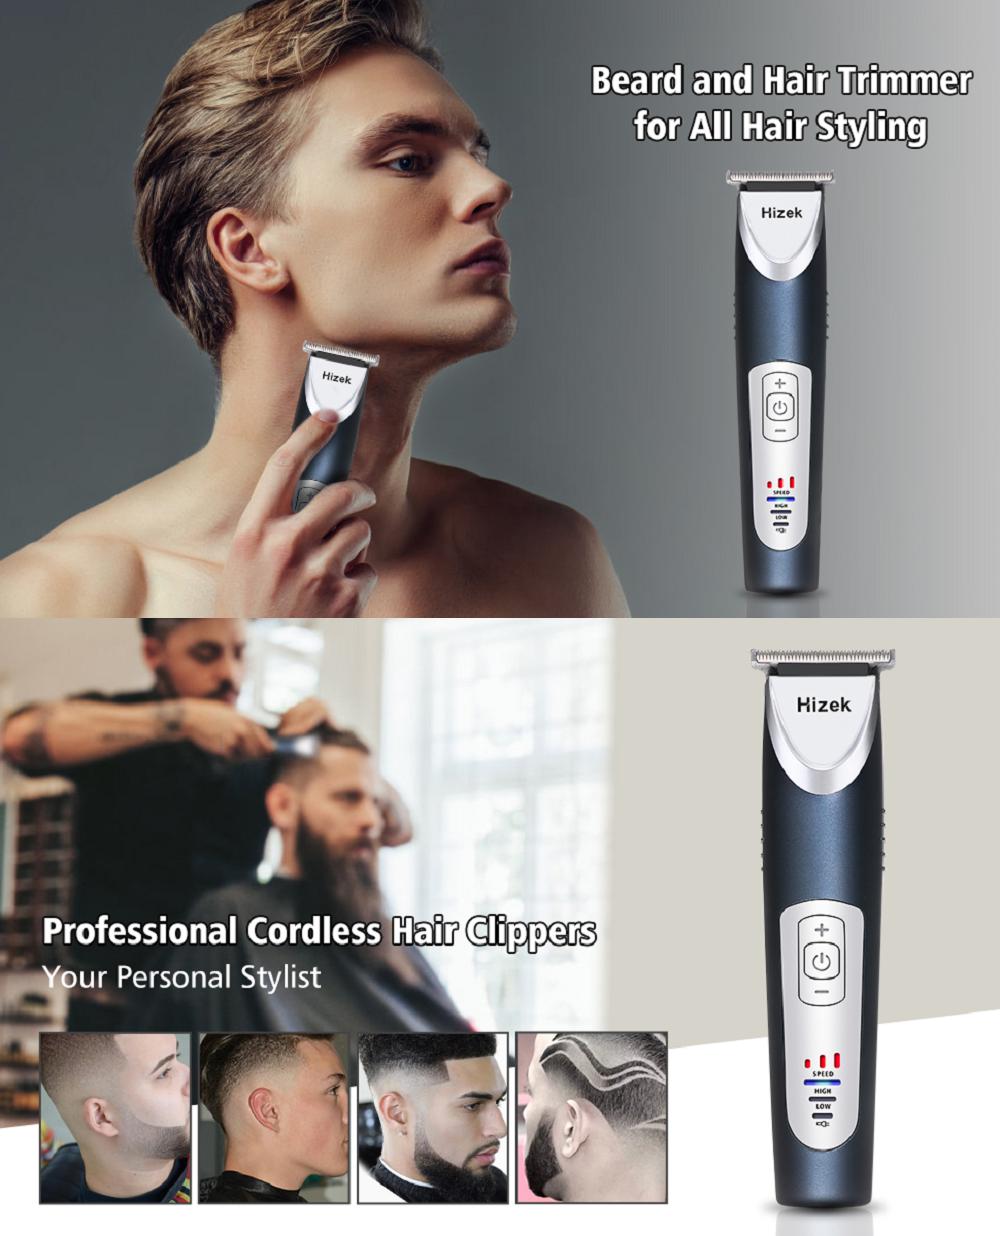 Hizek-A96-Hair-Clipper-Waterproof-Cordless-Mens-Trimmer-with-3-Adjustable-Speeds-4-Replacement-Head--1898313-1